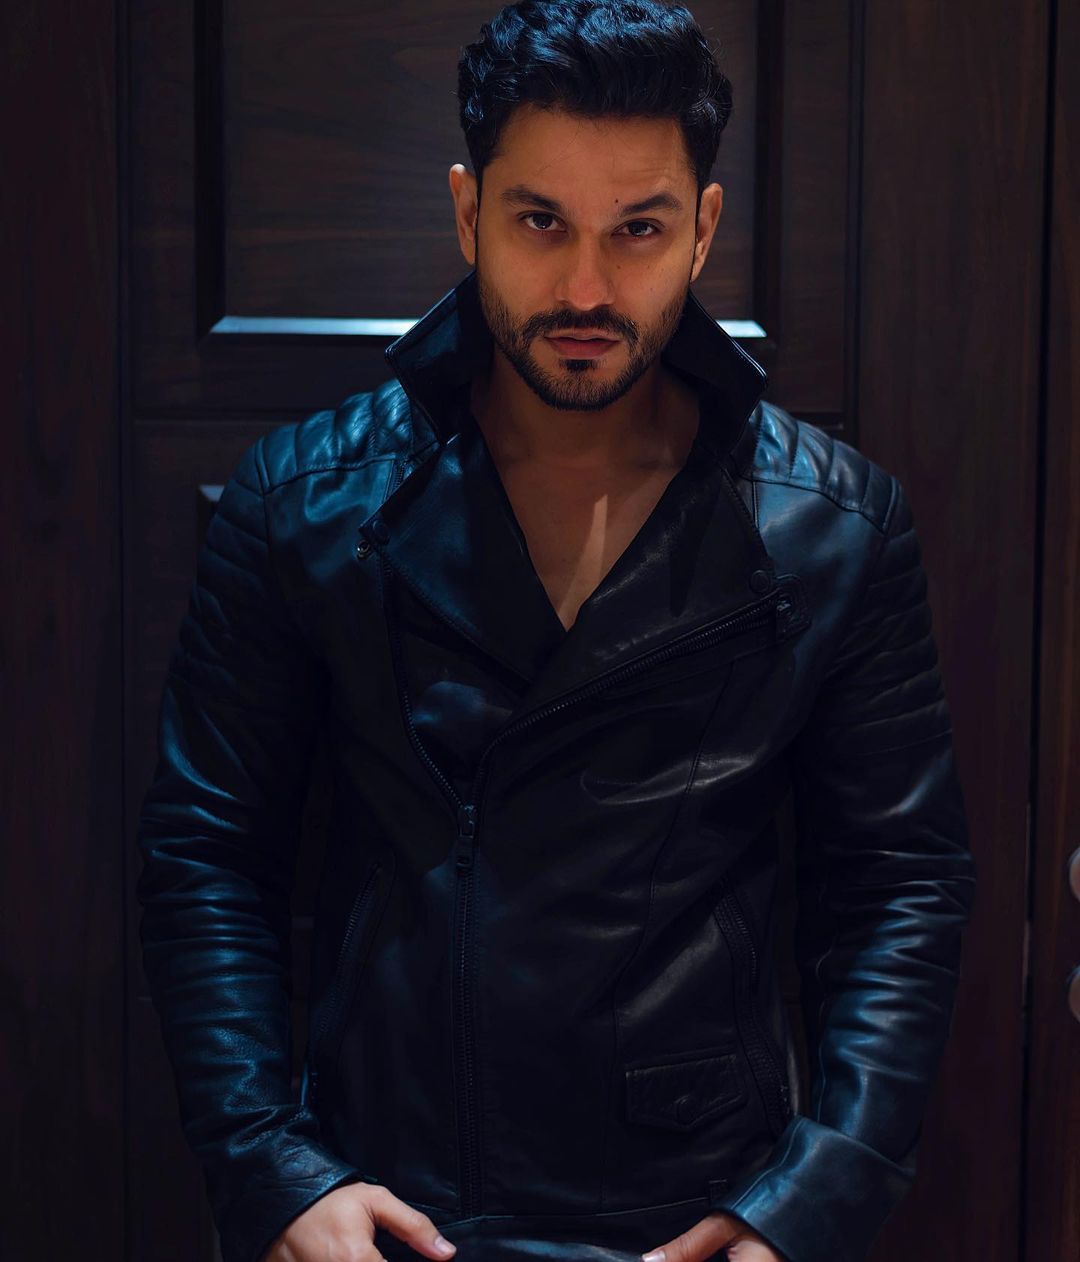 Kunal Kemmu Talks About Malpractices In Bollywood, Says, "I Can't Change Favouritism Or Nepotism But I Put Blinders On"